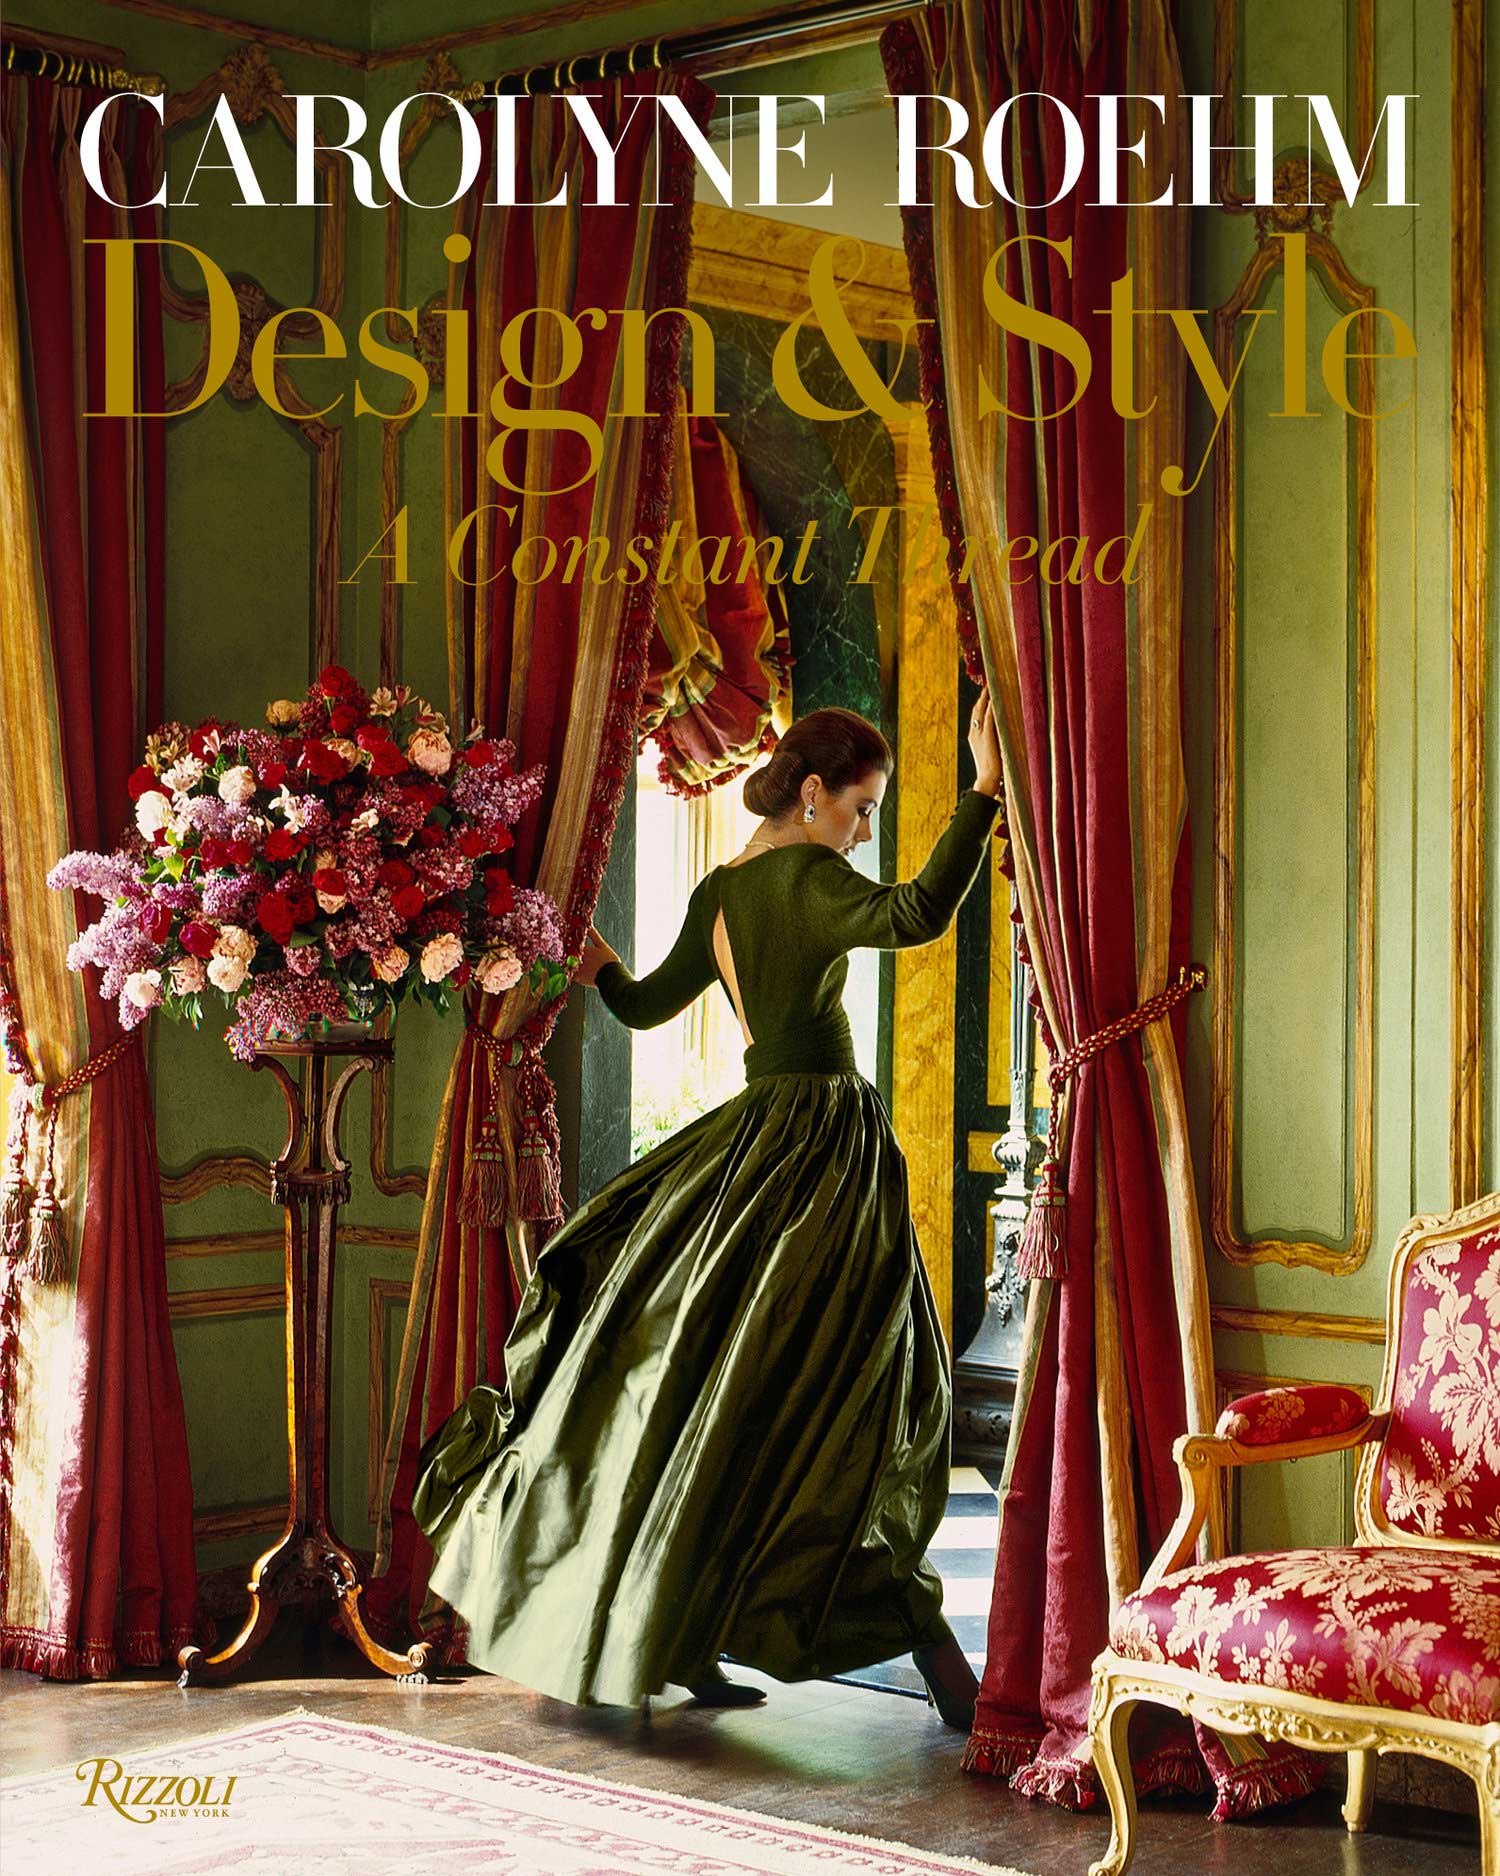 Design and Style book cover